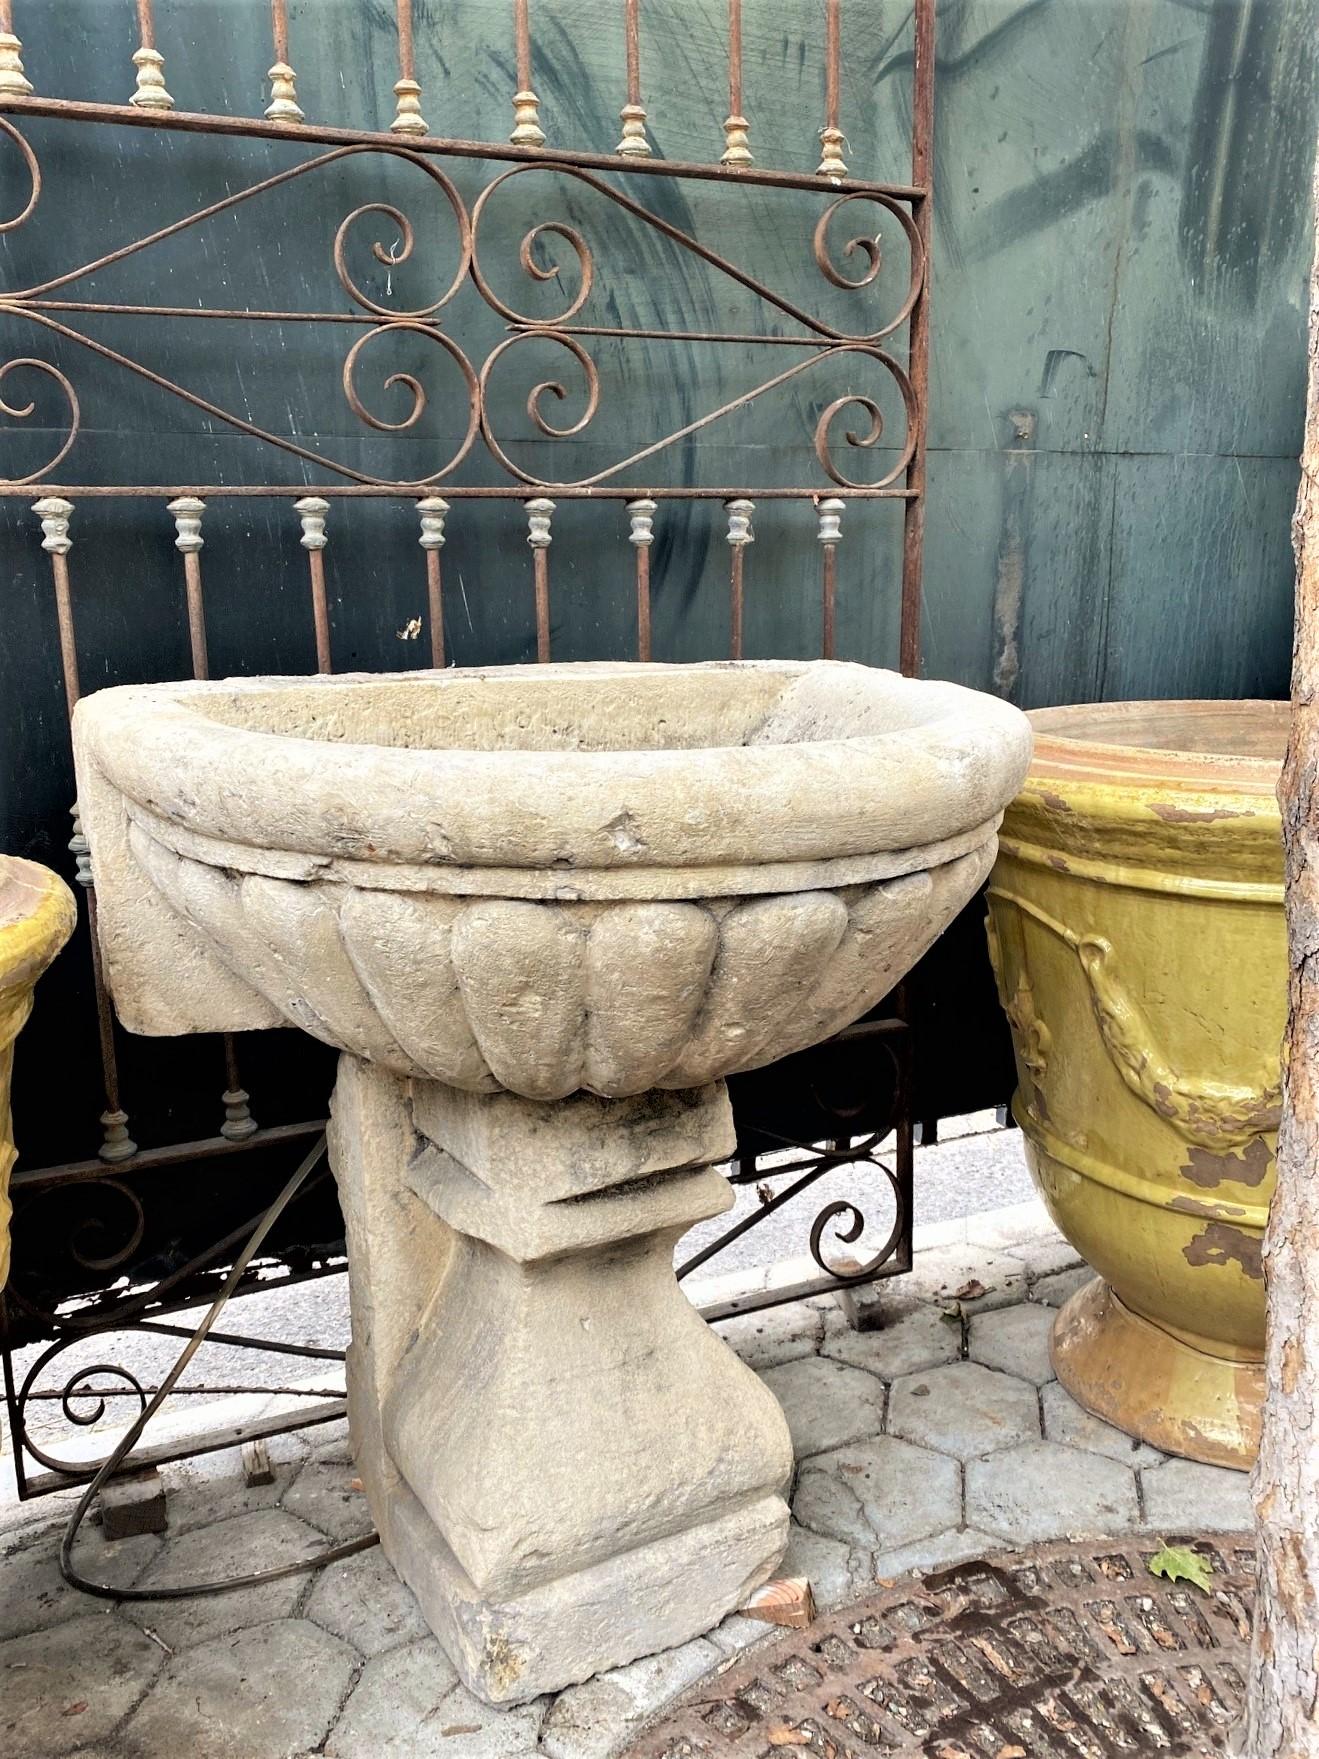 Large Hand Carved Stone Sink Basin Wall Fountain Bowl & pedestal base Antique CA . A beautiful 18th Century Hand Carved Stone Sink / Wall mount fountain basin . versatile sculpted architectural element for an outdoor Garden or indoor setting.  Very